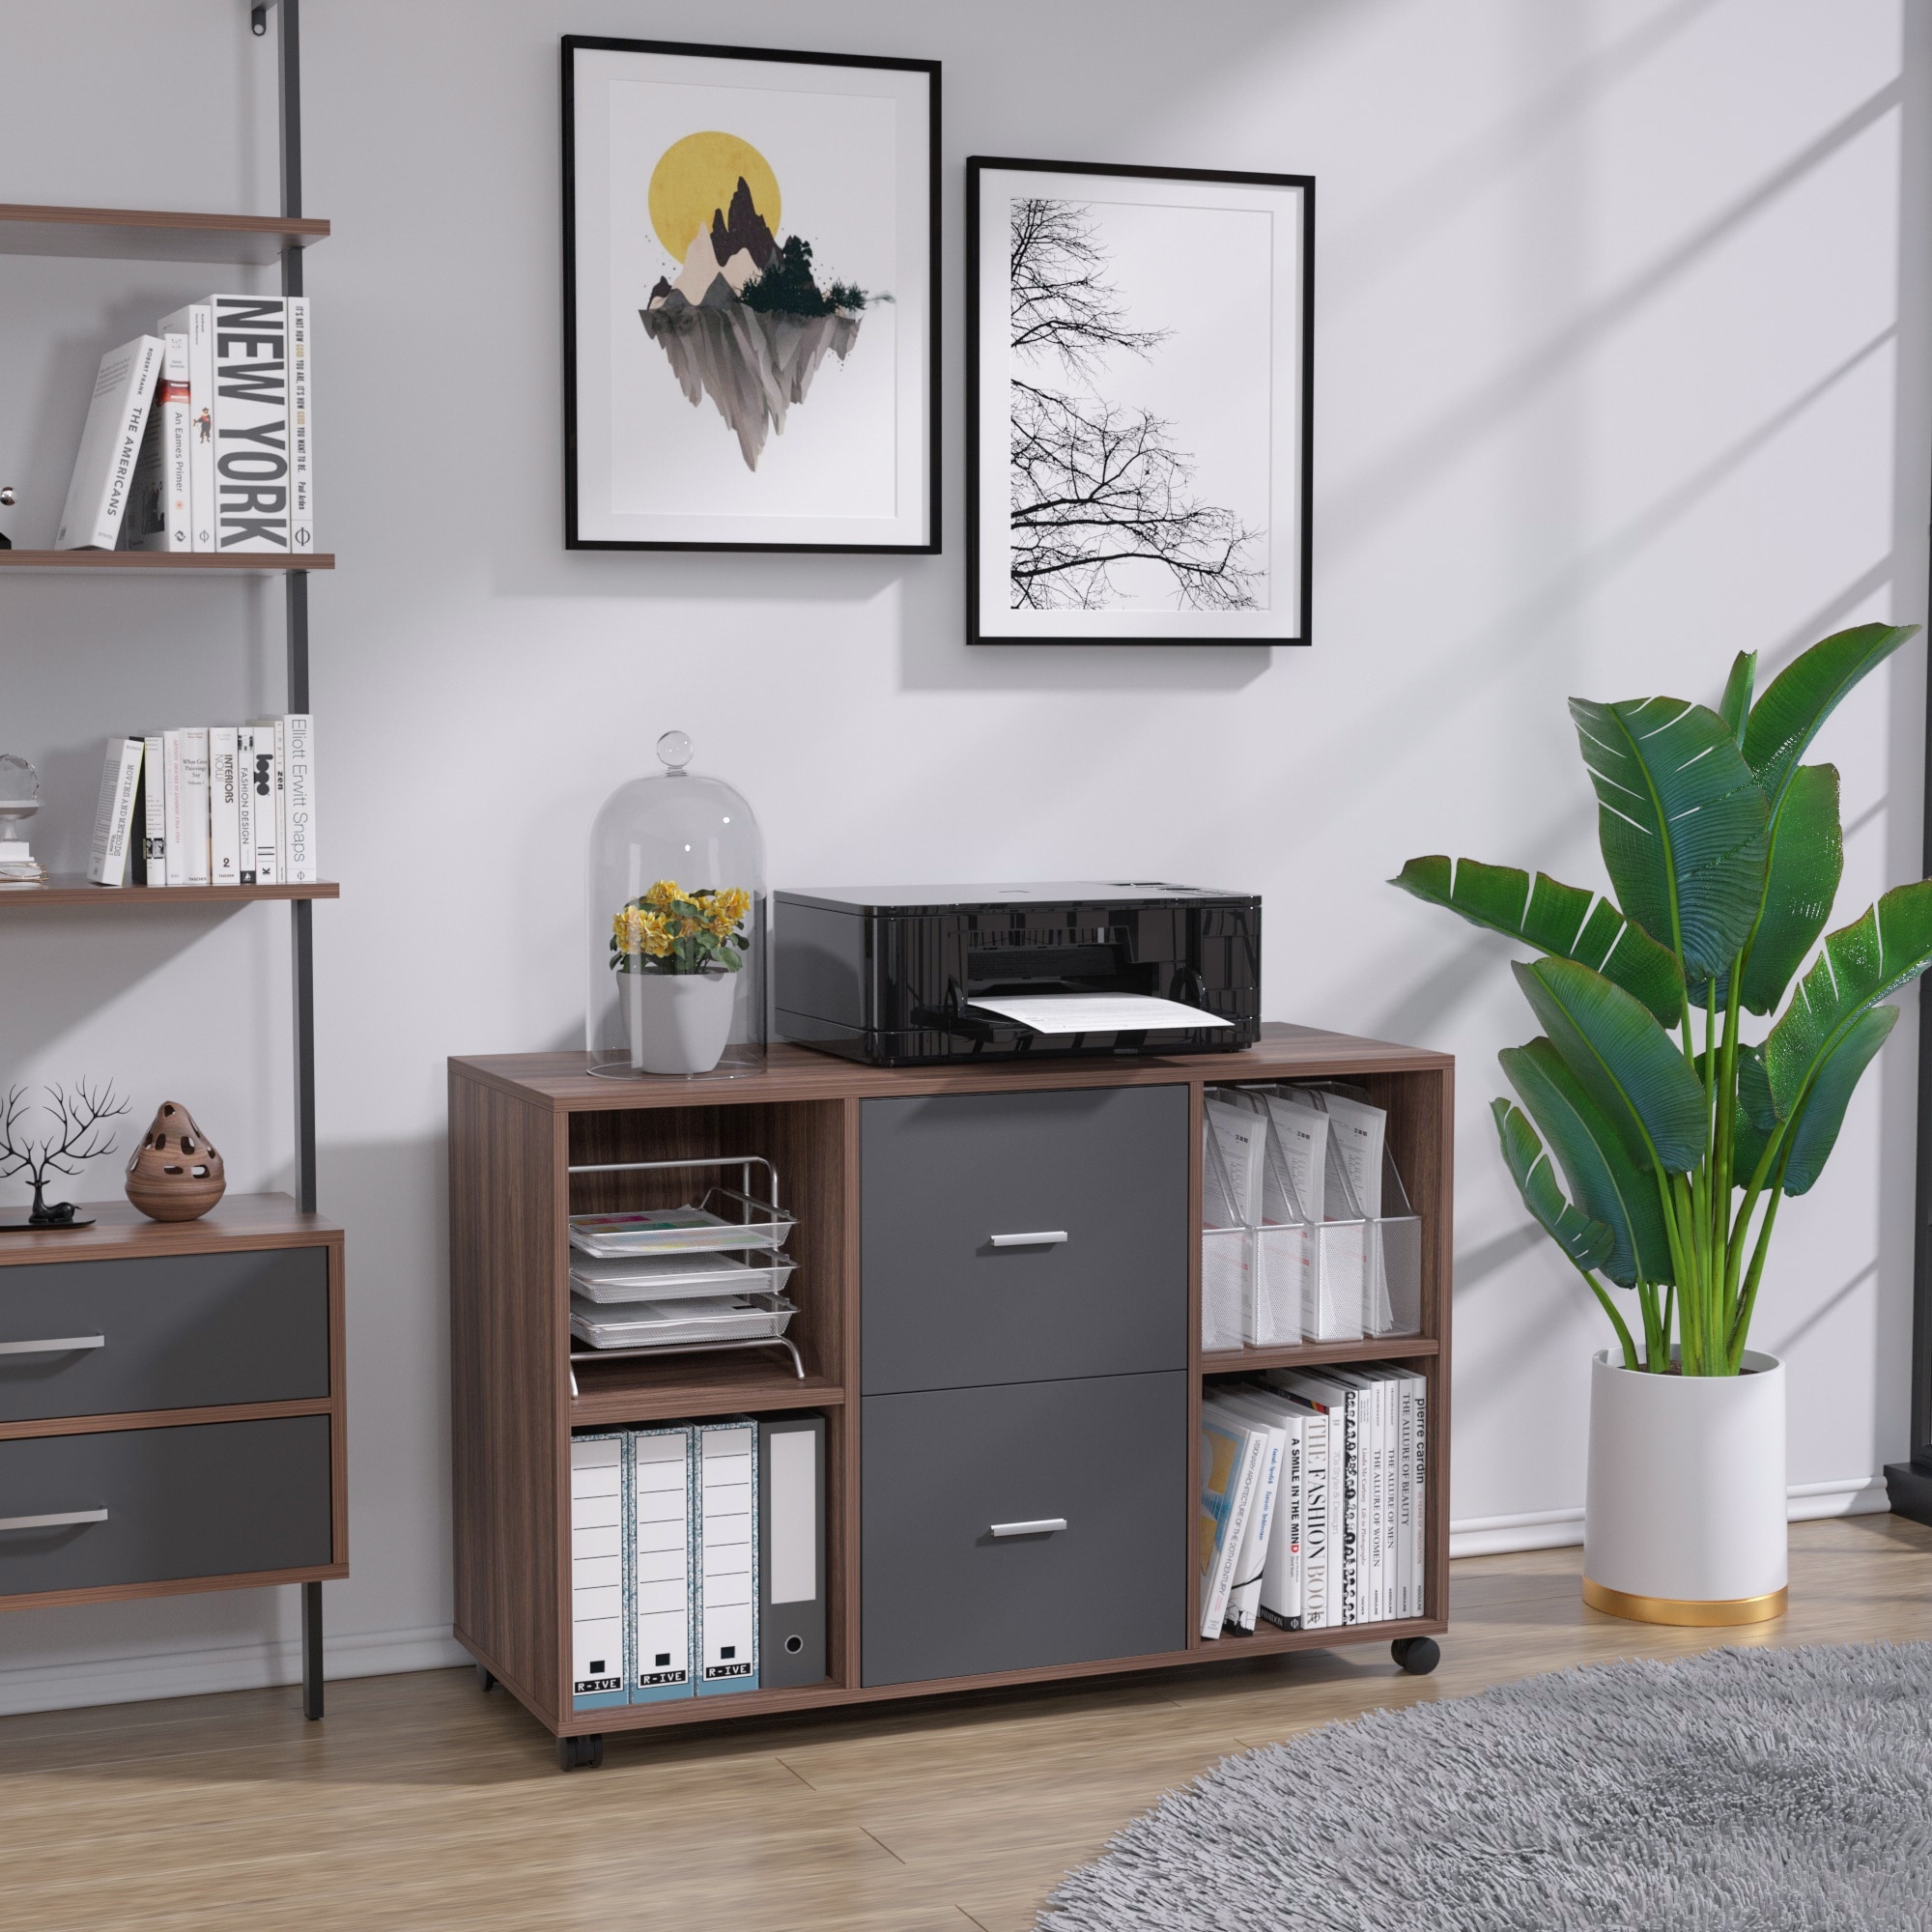 https://ak1.ostkcdn.com/images/products/is/images/direct/15a2c5671da93605cdfa12933be0ee86ab0f4702/Mobile-filing-cabinet-with-2-drawers-and-4-open-storage-cabinets.jpg